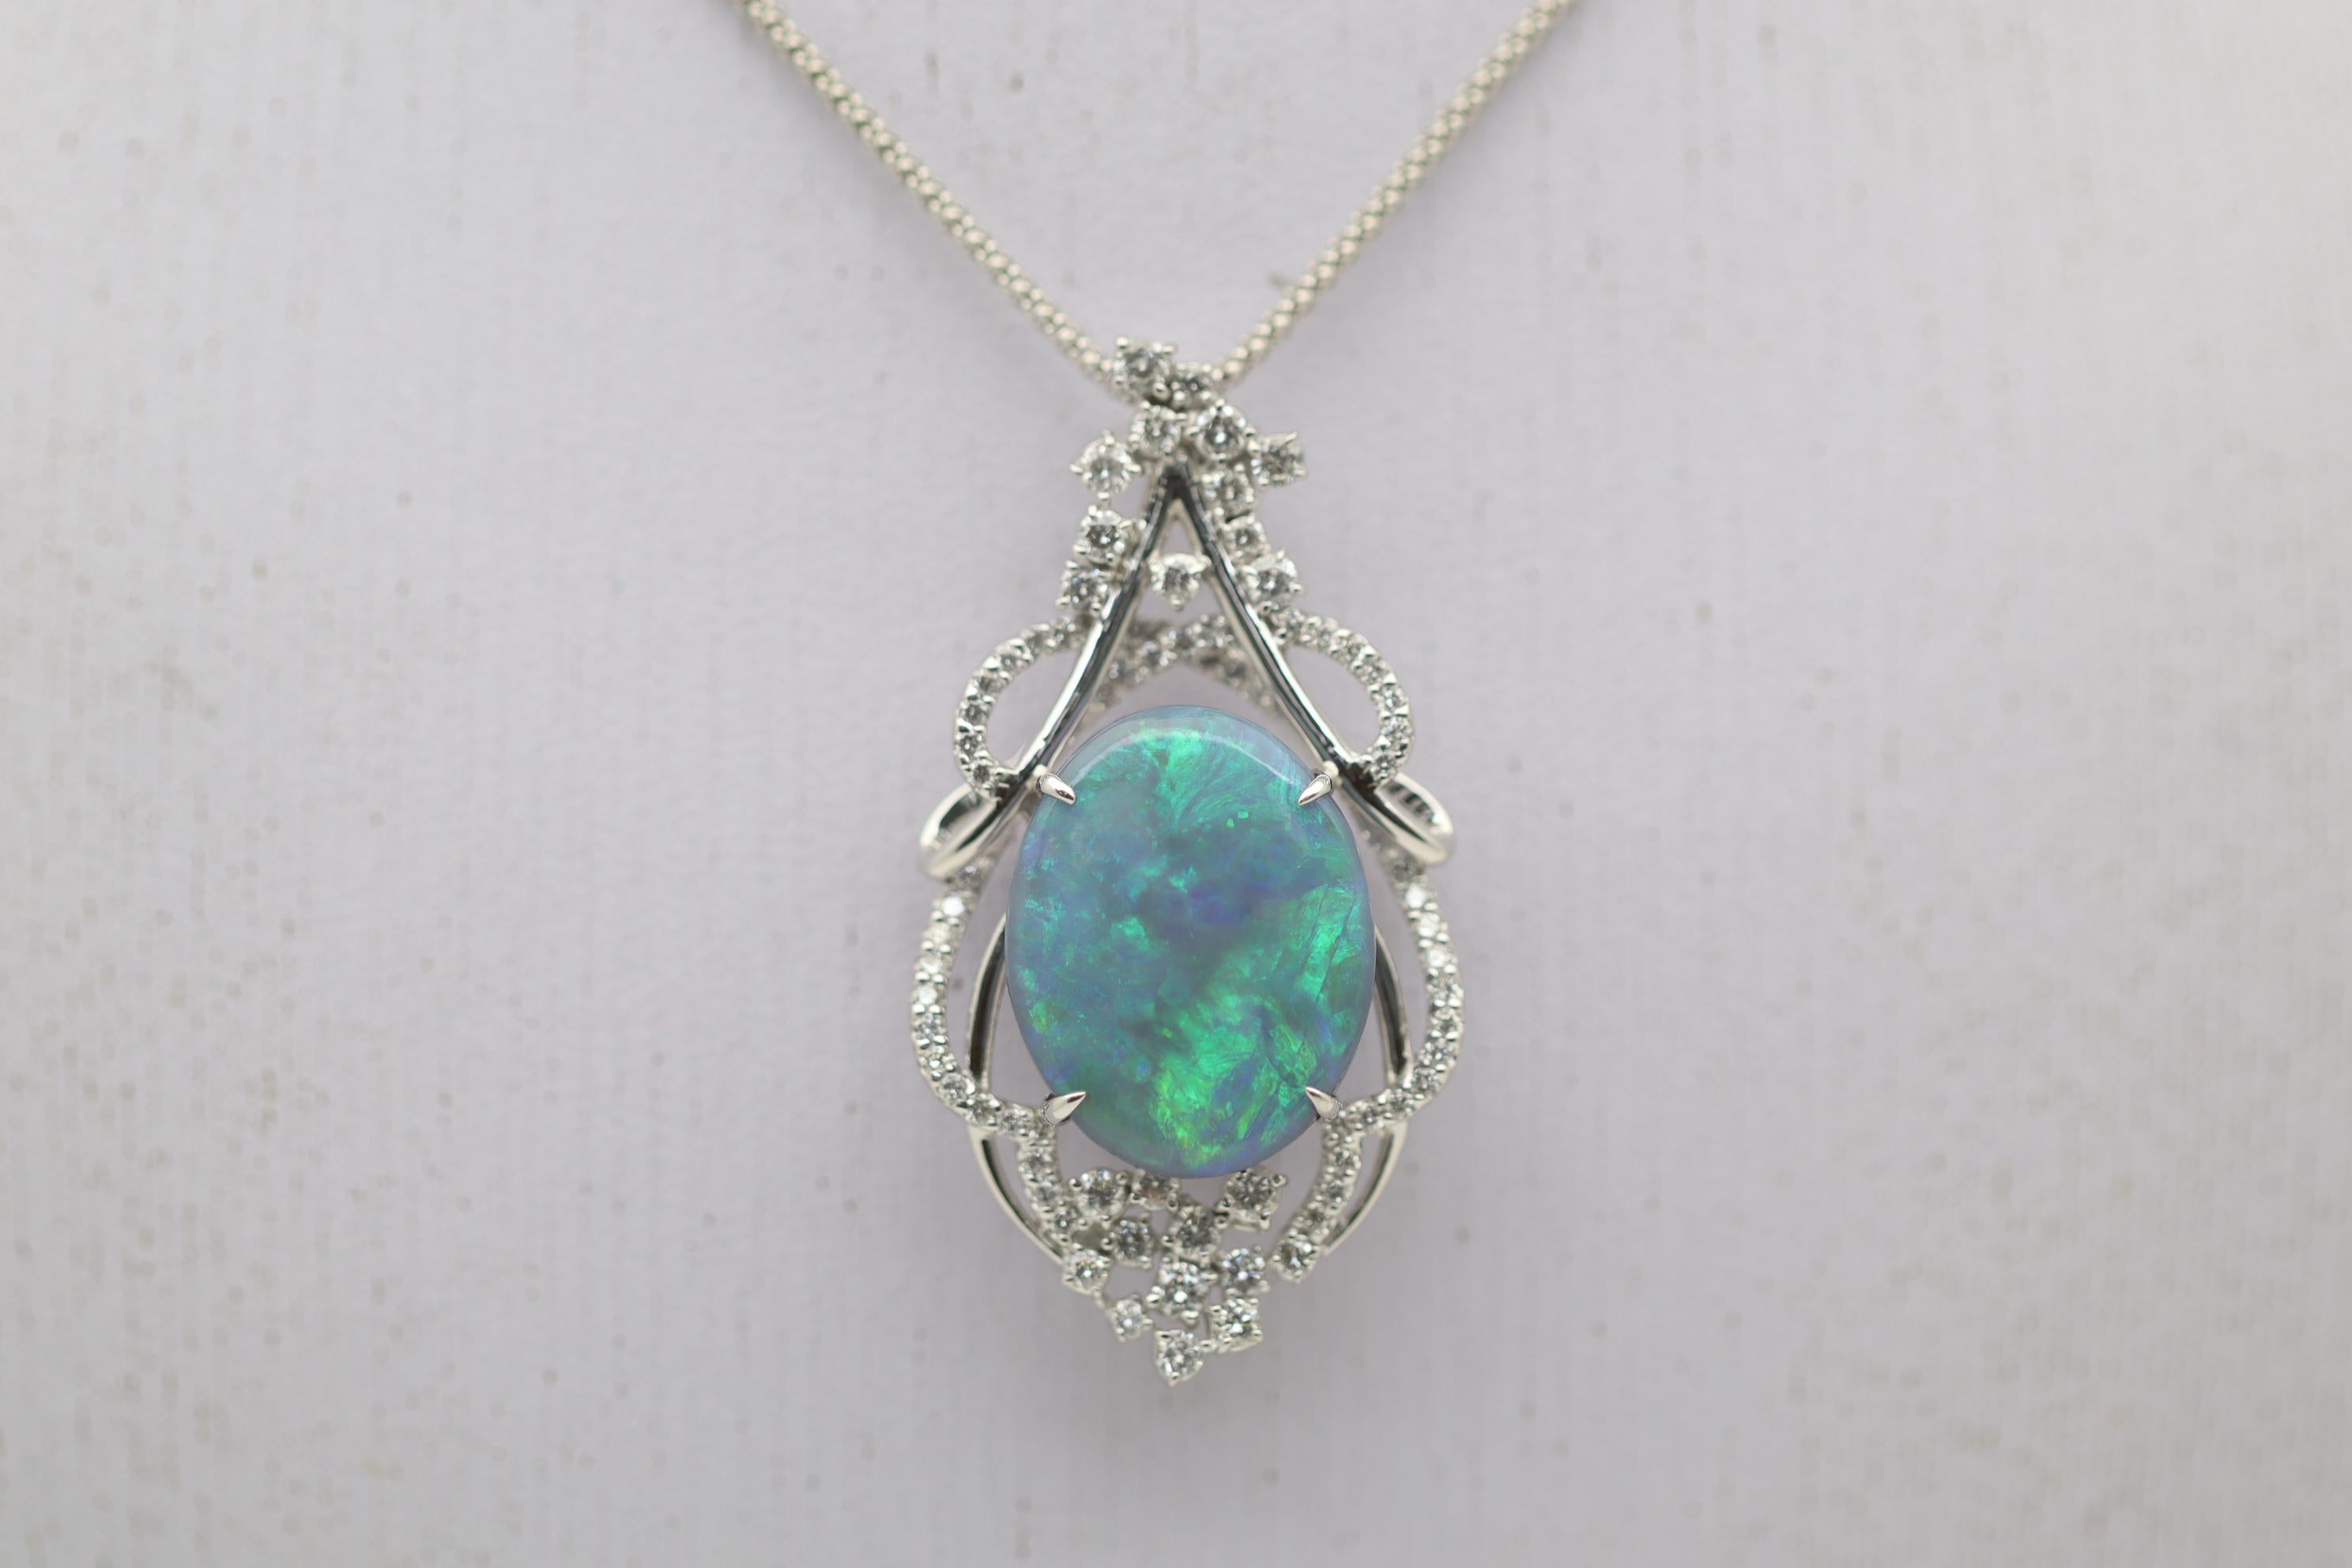 A large and impressive black opal from Australia takes center stage of this lovely gold made pendant. The opal weighs exactly 10.00 carats, is completely natural with no treatments, and has great play-of-color as primarily green with some blues